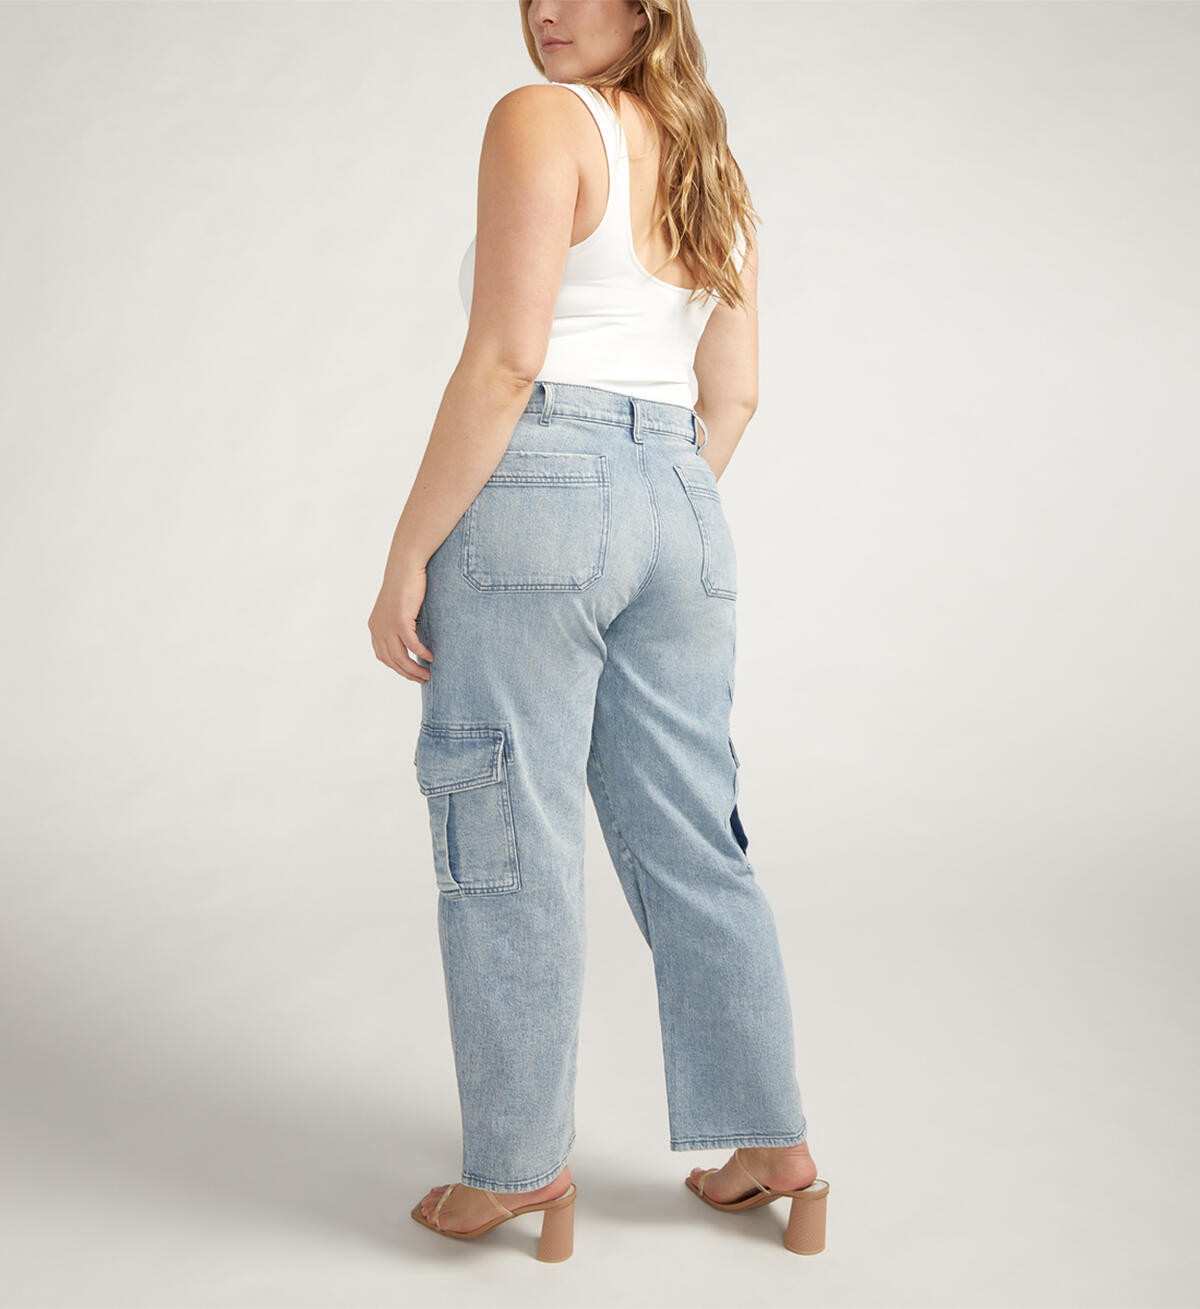 Utility Cargo Jeans Plus Size, , hi-res image number 1